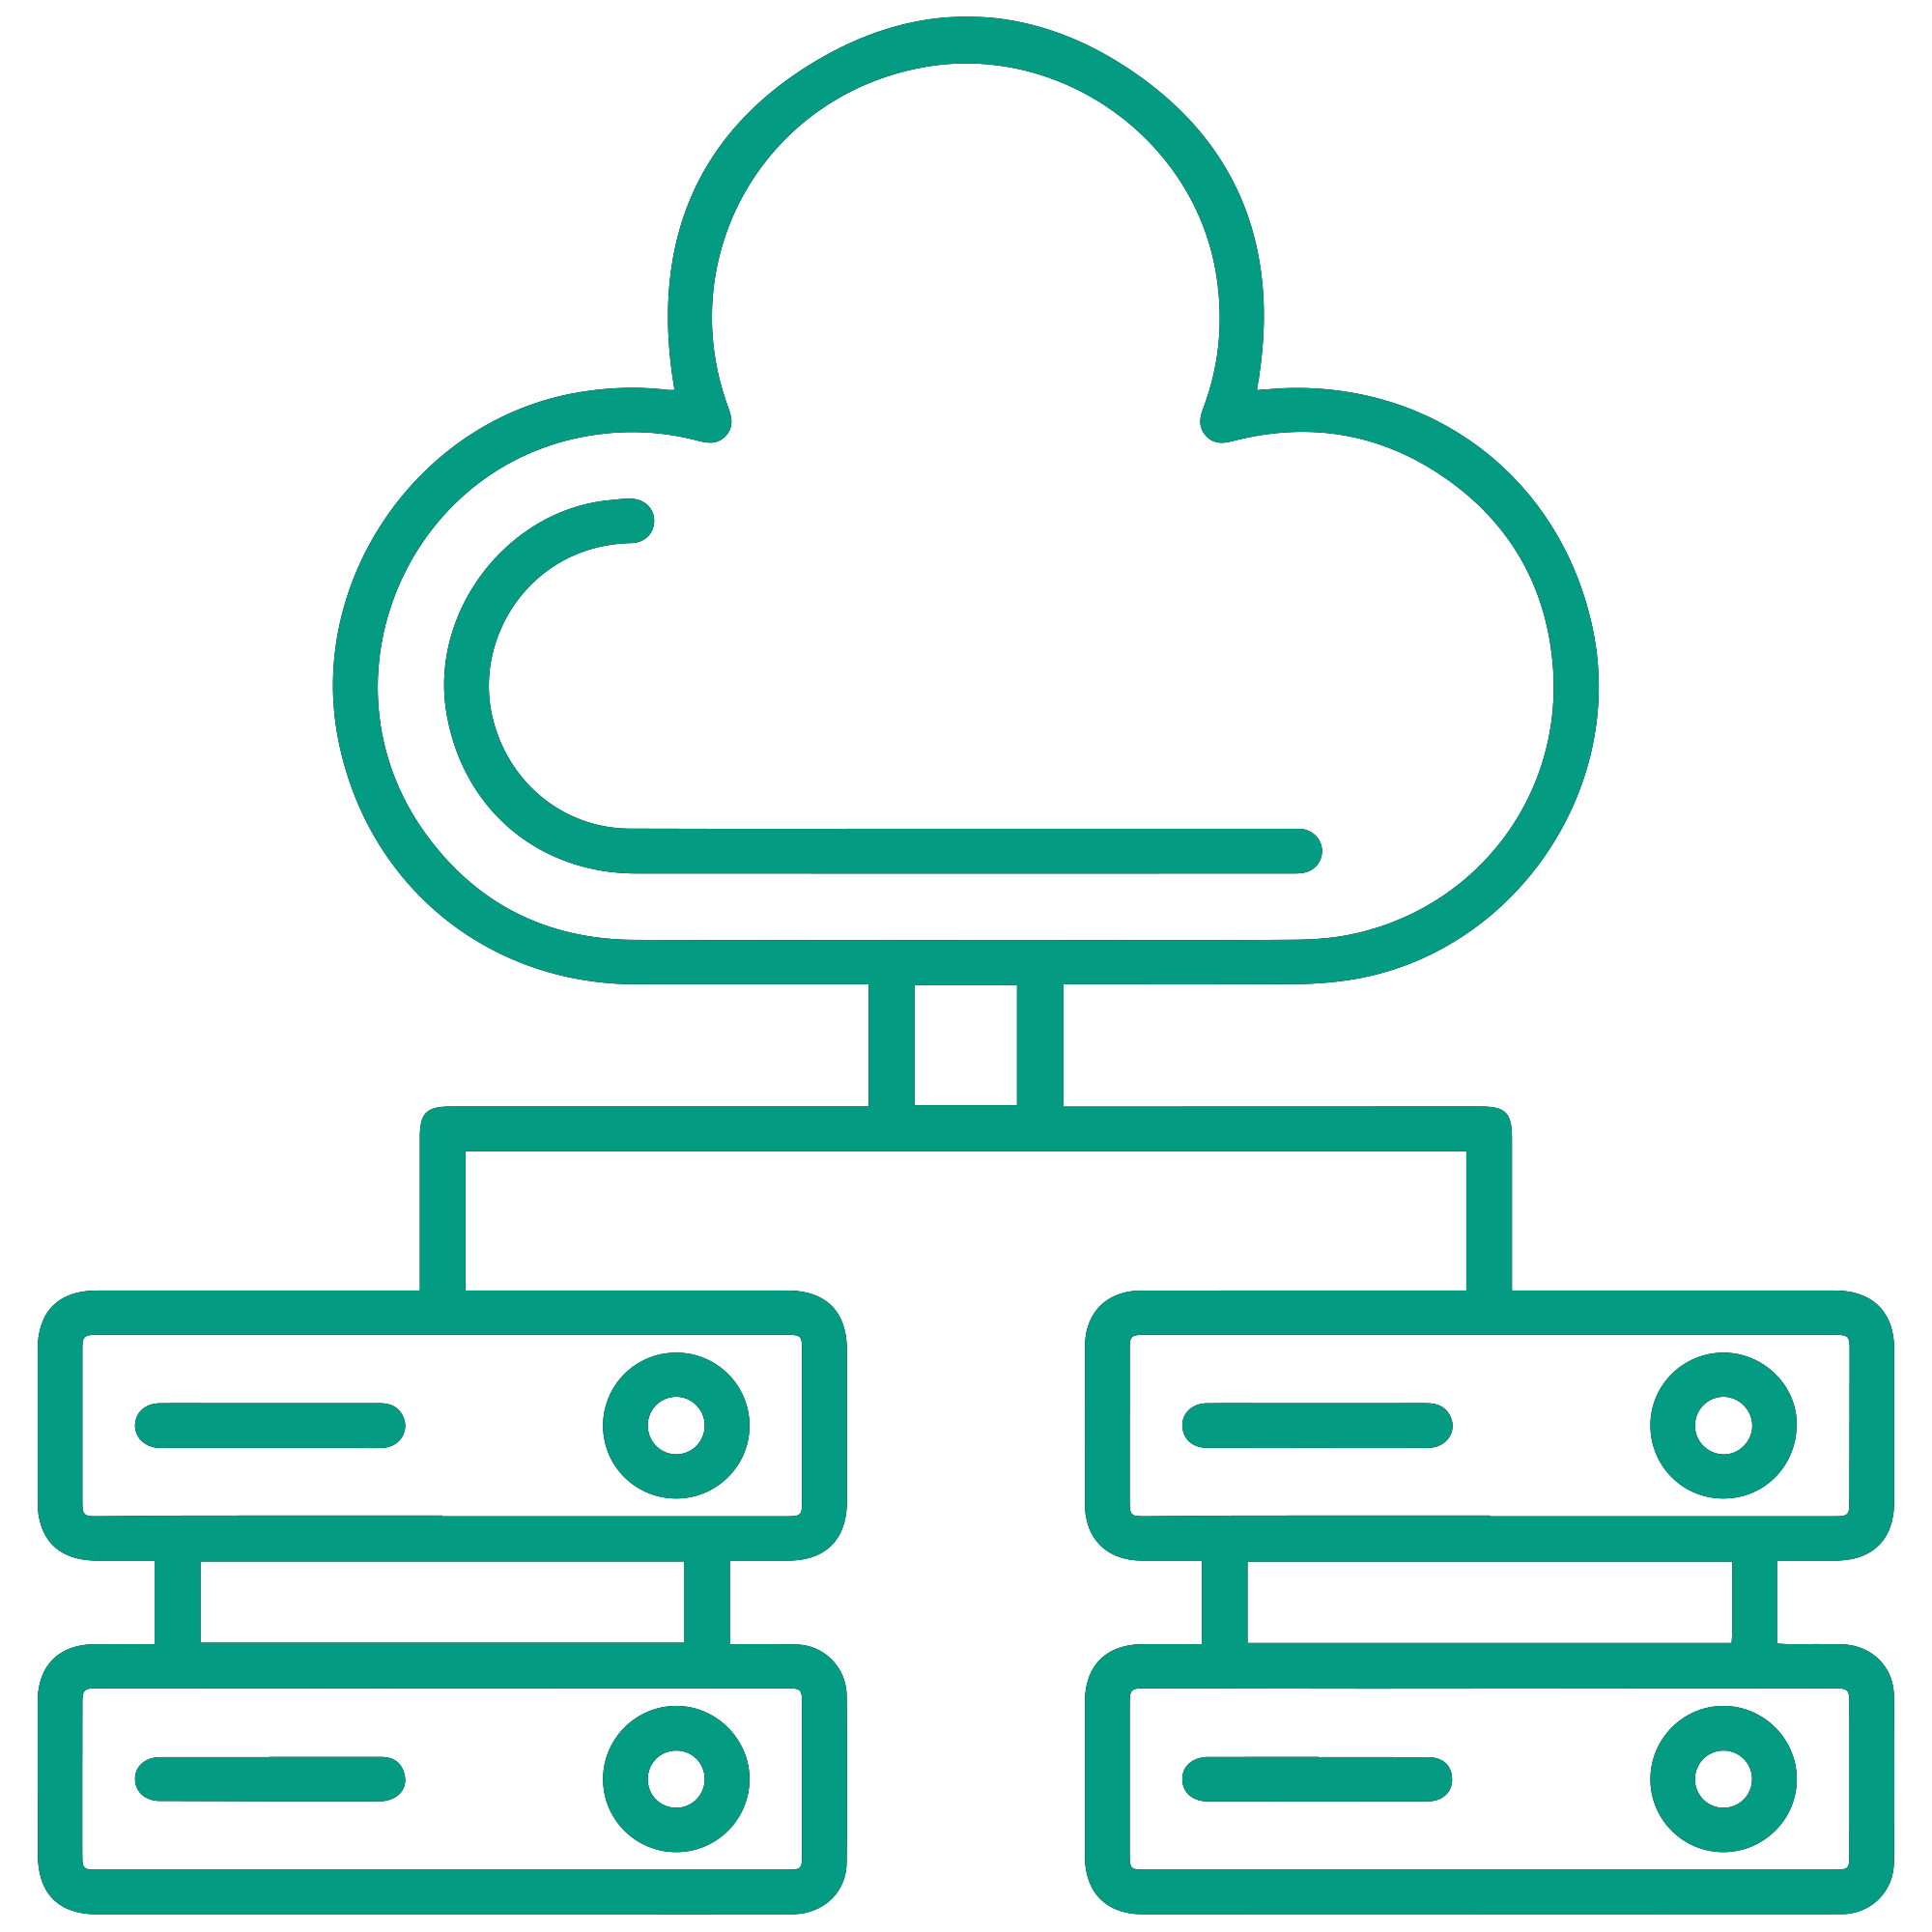 A vibrant green cloud against a matching green background, representing the concept of "Data Gathering and Preprocessing".